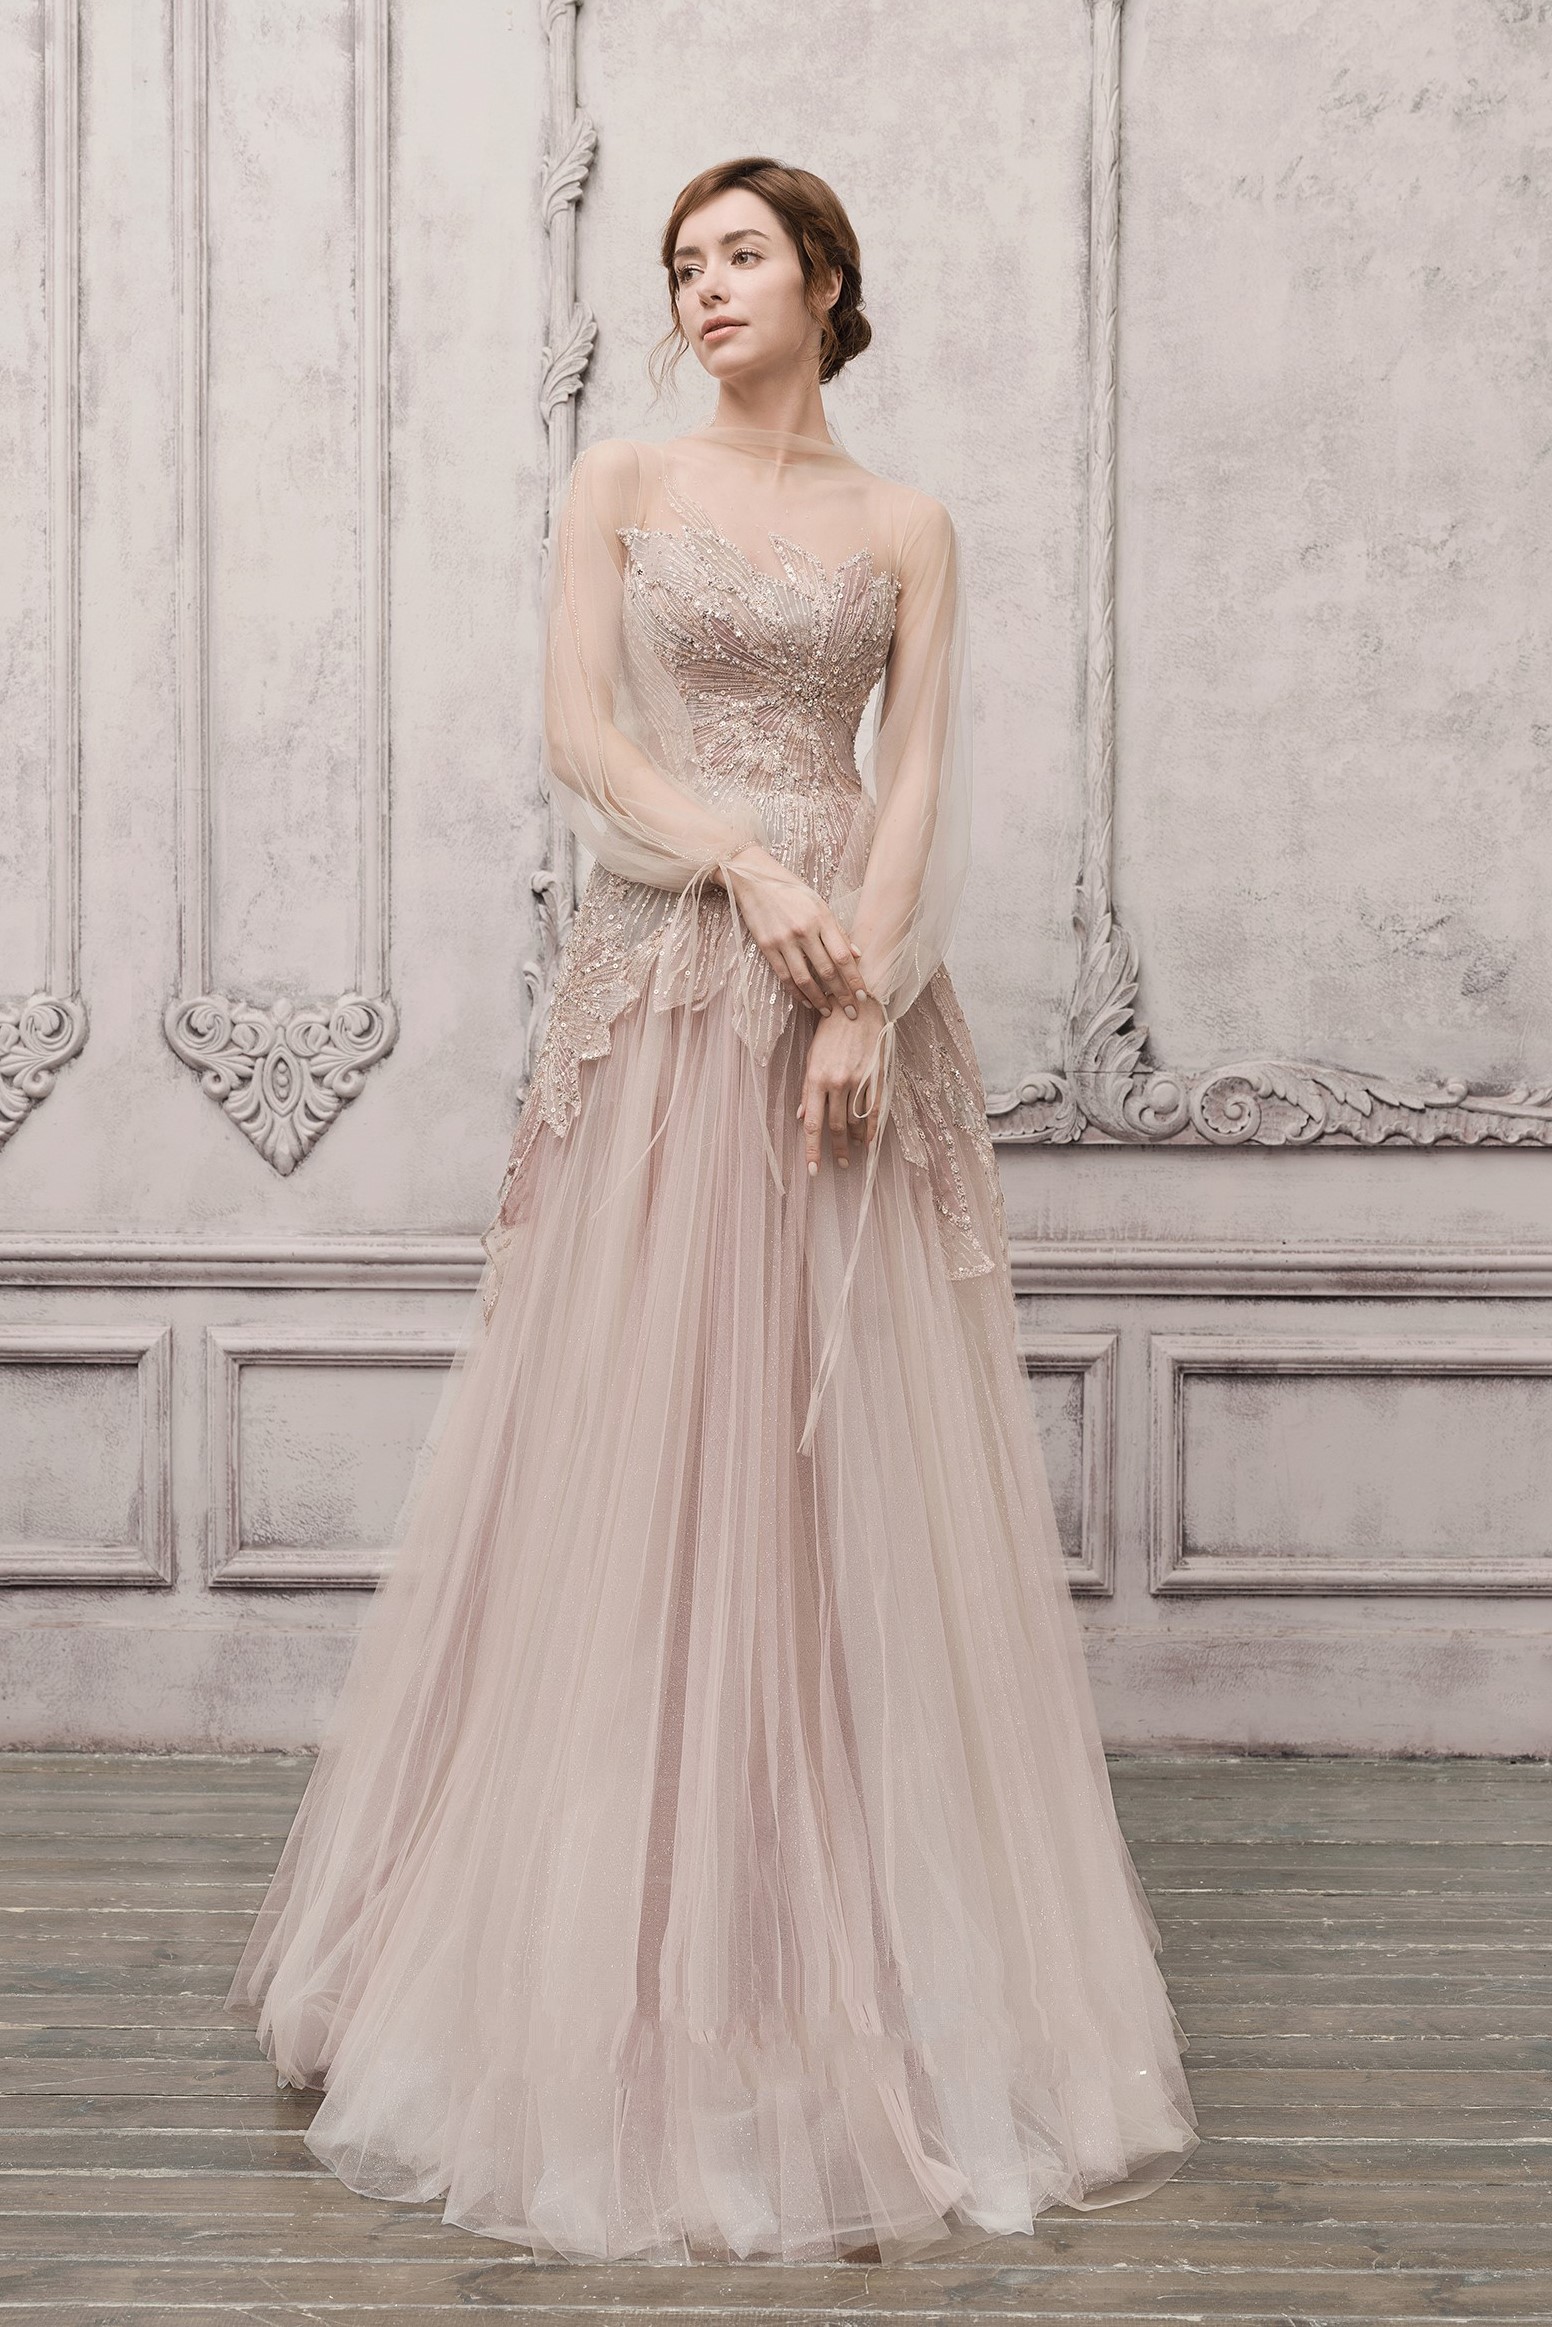 The Atelier Couture Sheer Illusion Embellished Gown - District 5